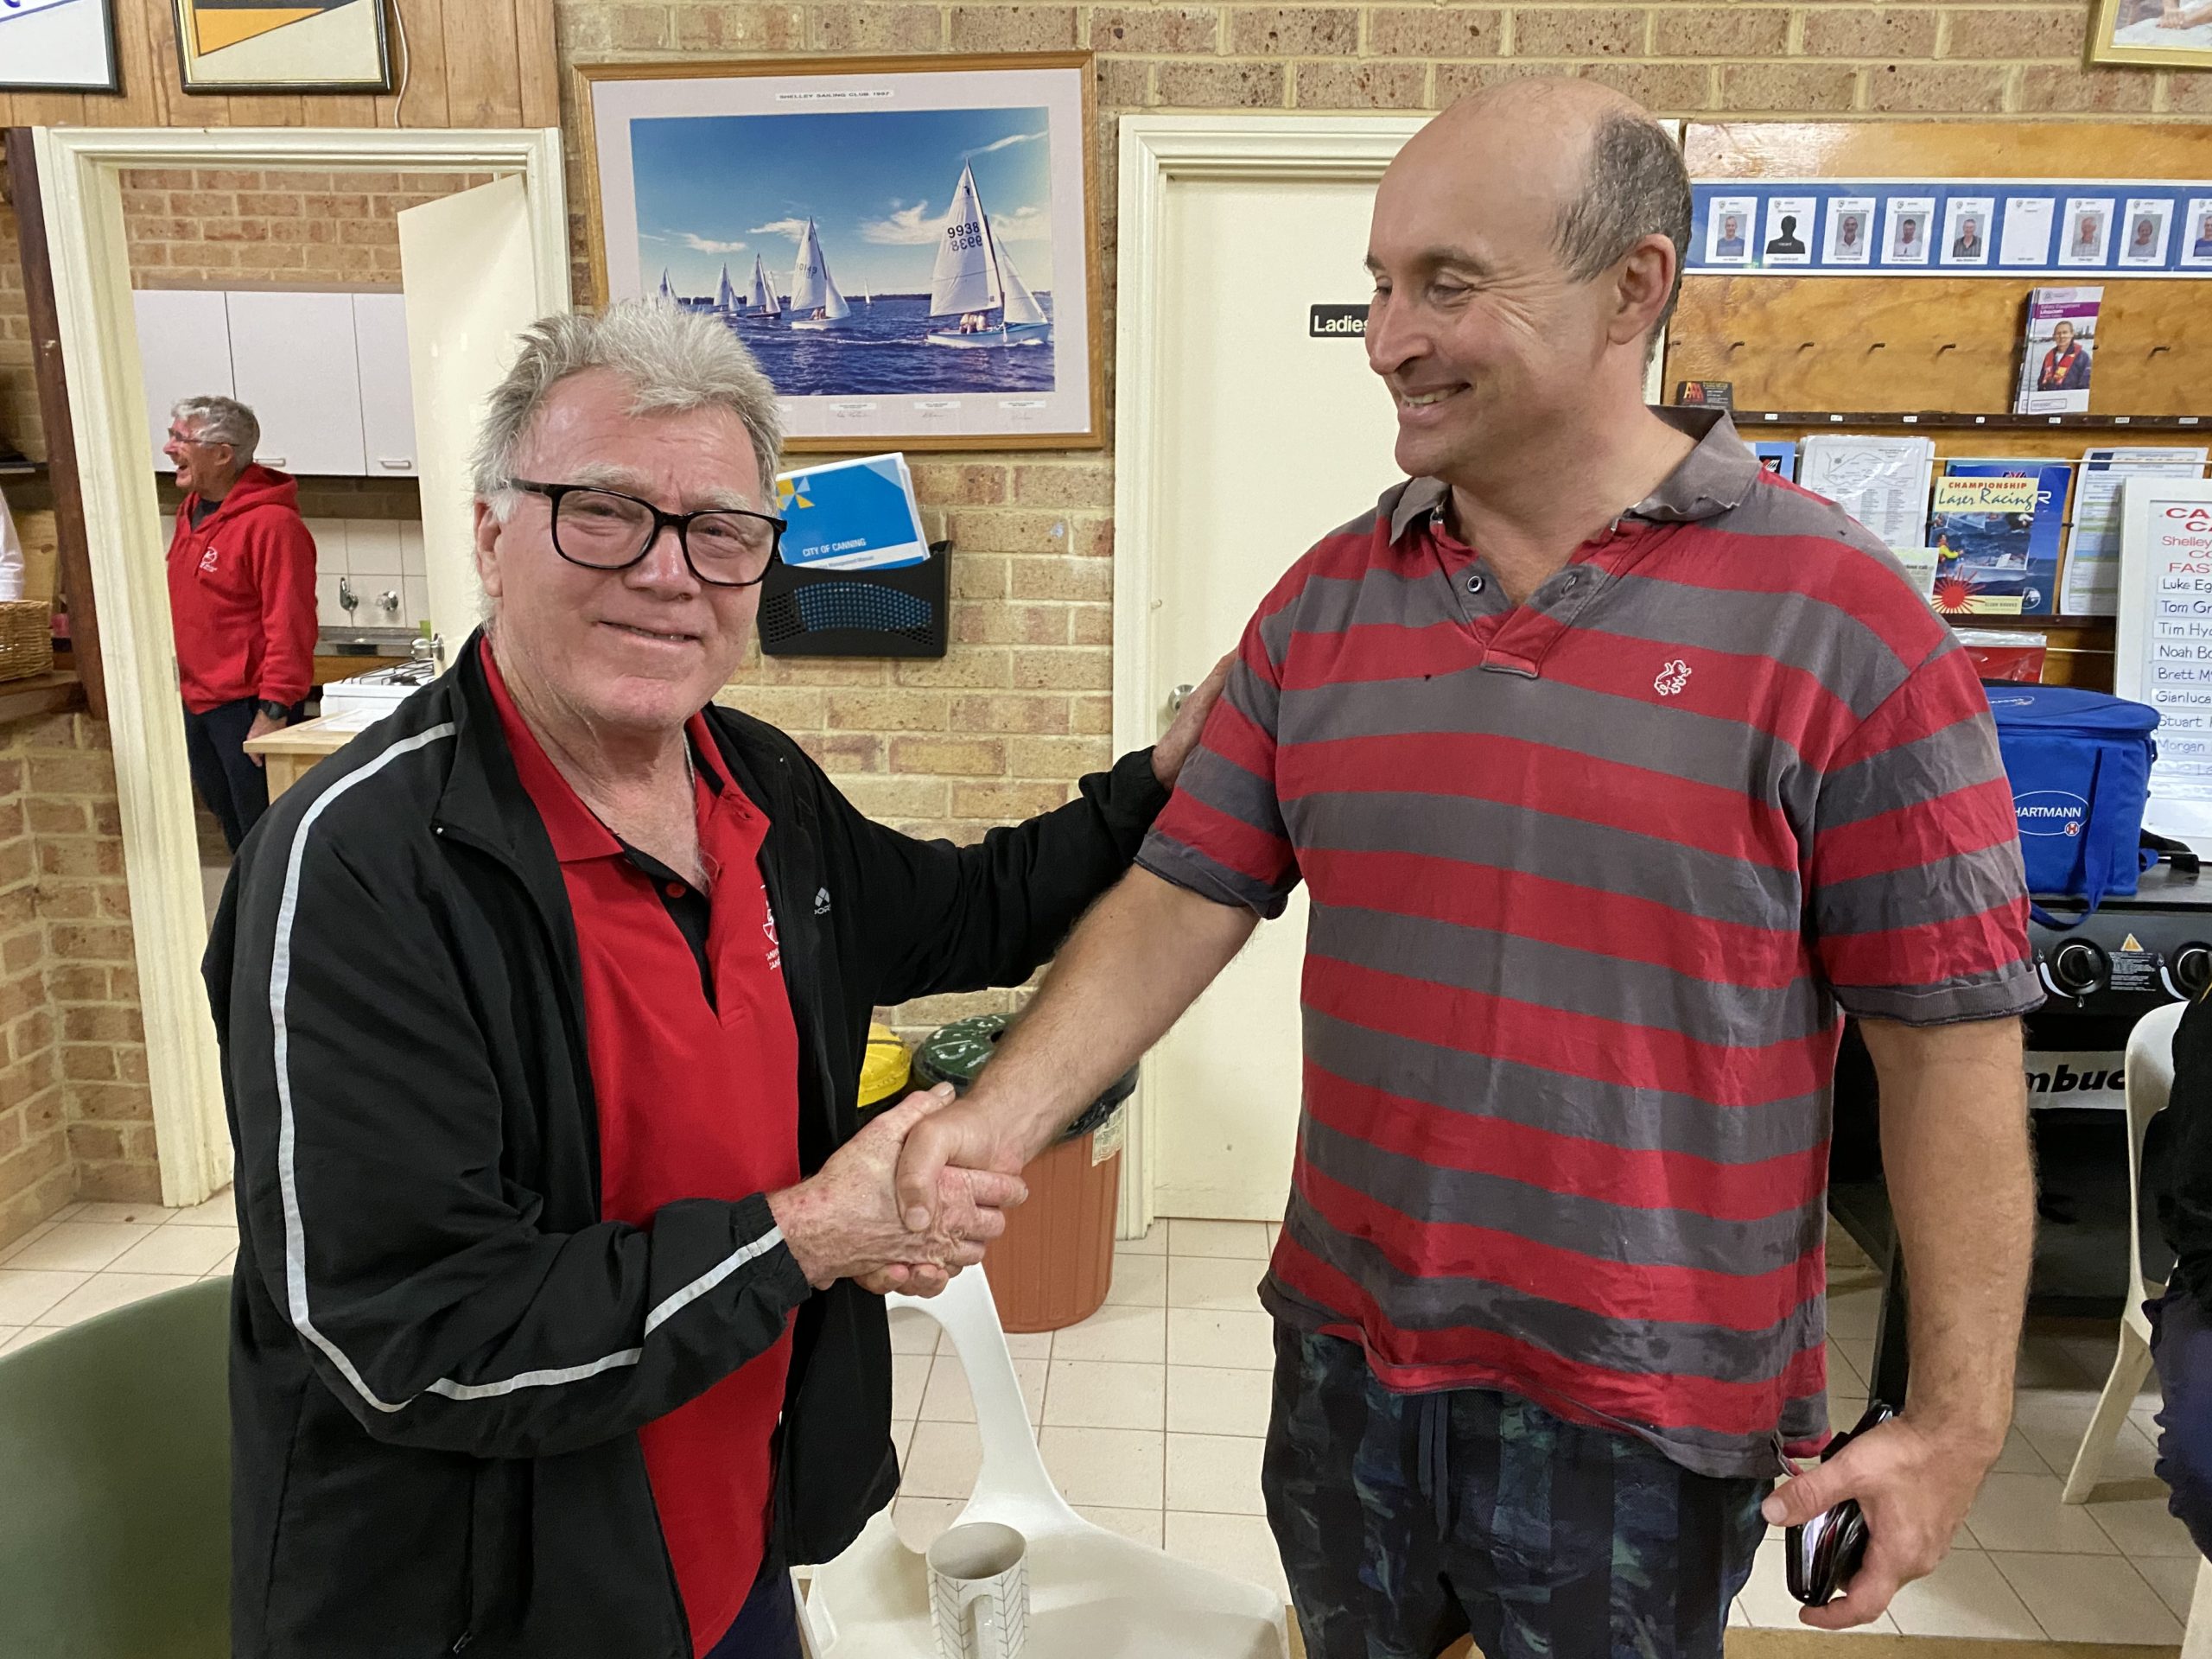 Tuesday 21st July 2020 : Tonight’s photos shows club member Mike Galanty presenting David Gardiner with a movie voucher.